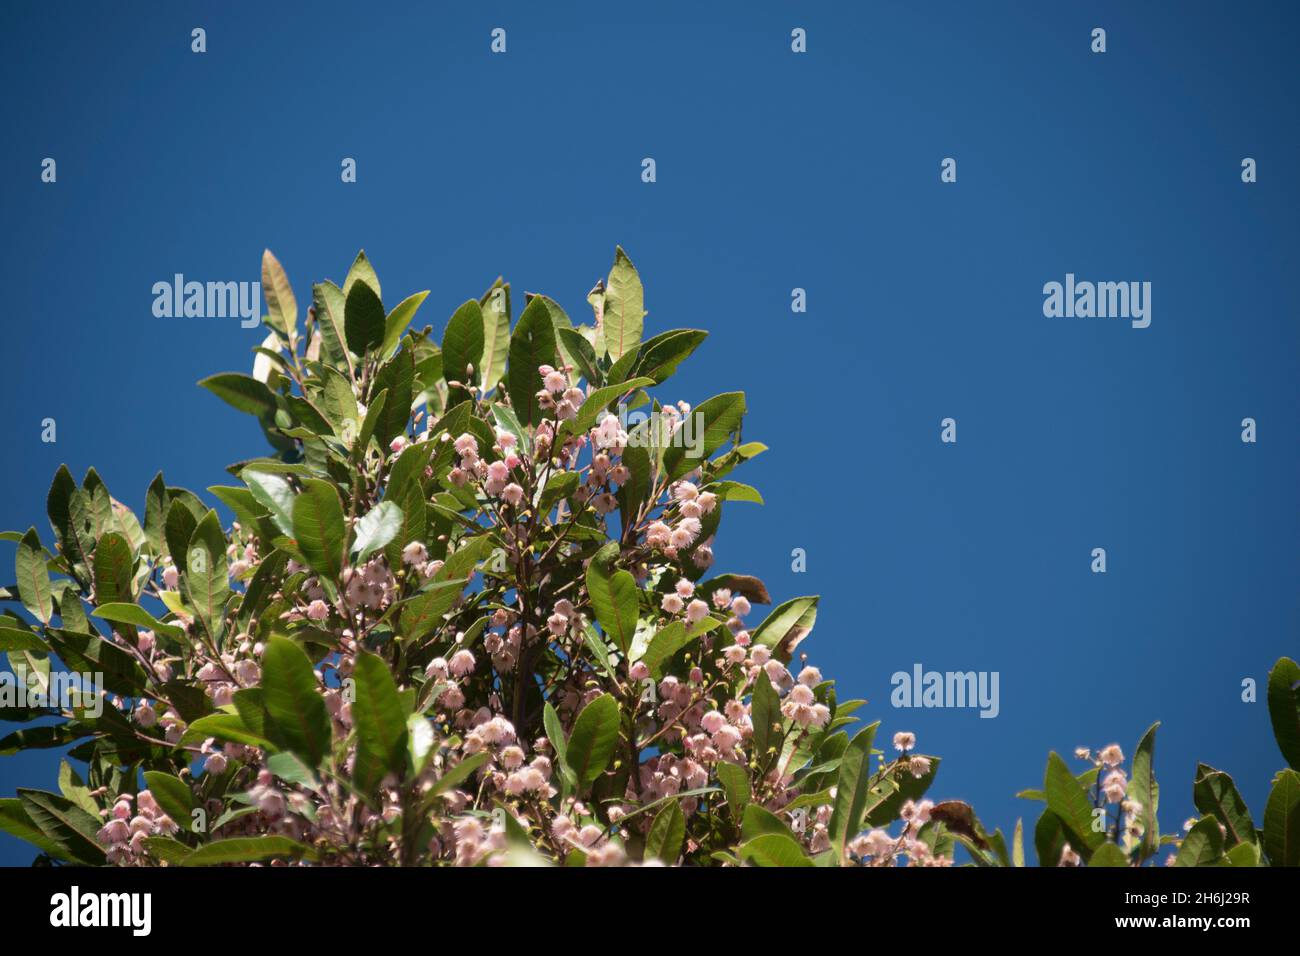 Top of Australian blueberry ash tree (Elaeocarpus reticulatus, ash quandong) with profusion of pink blossom, against a blue sky. Copy space. Stock Photo